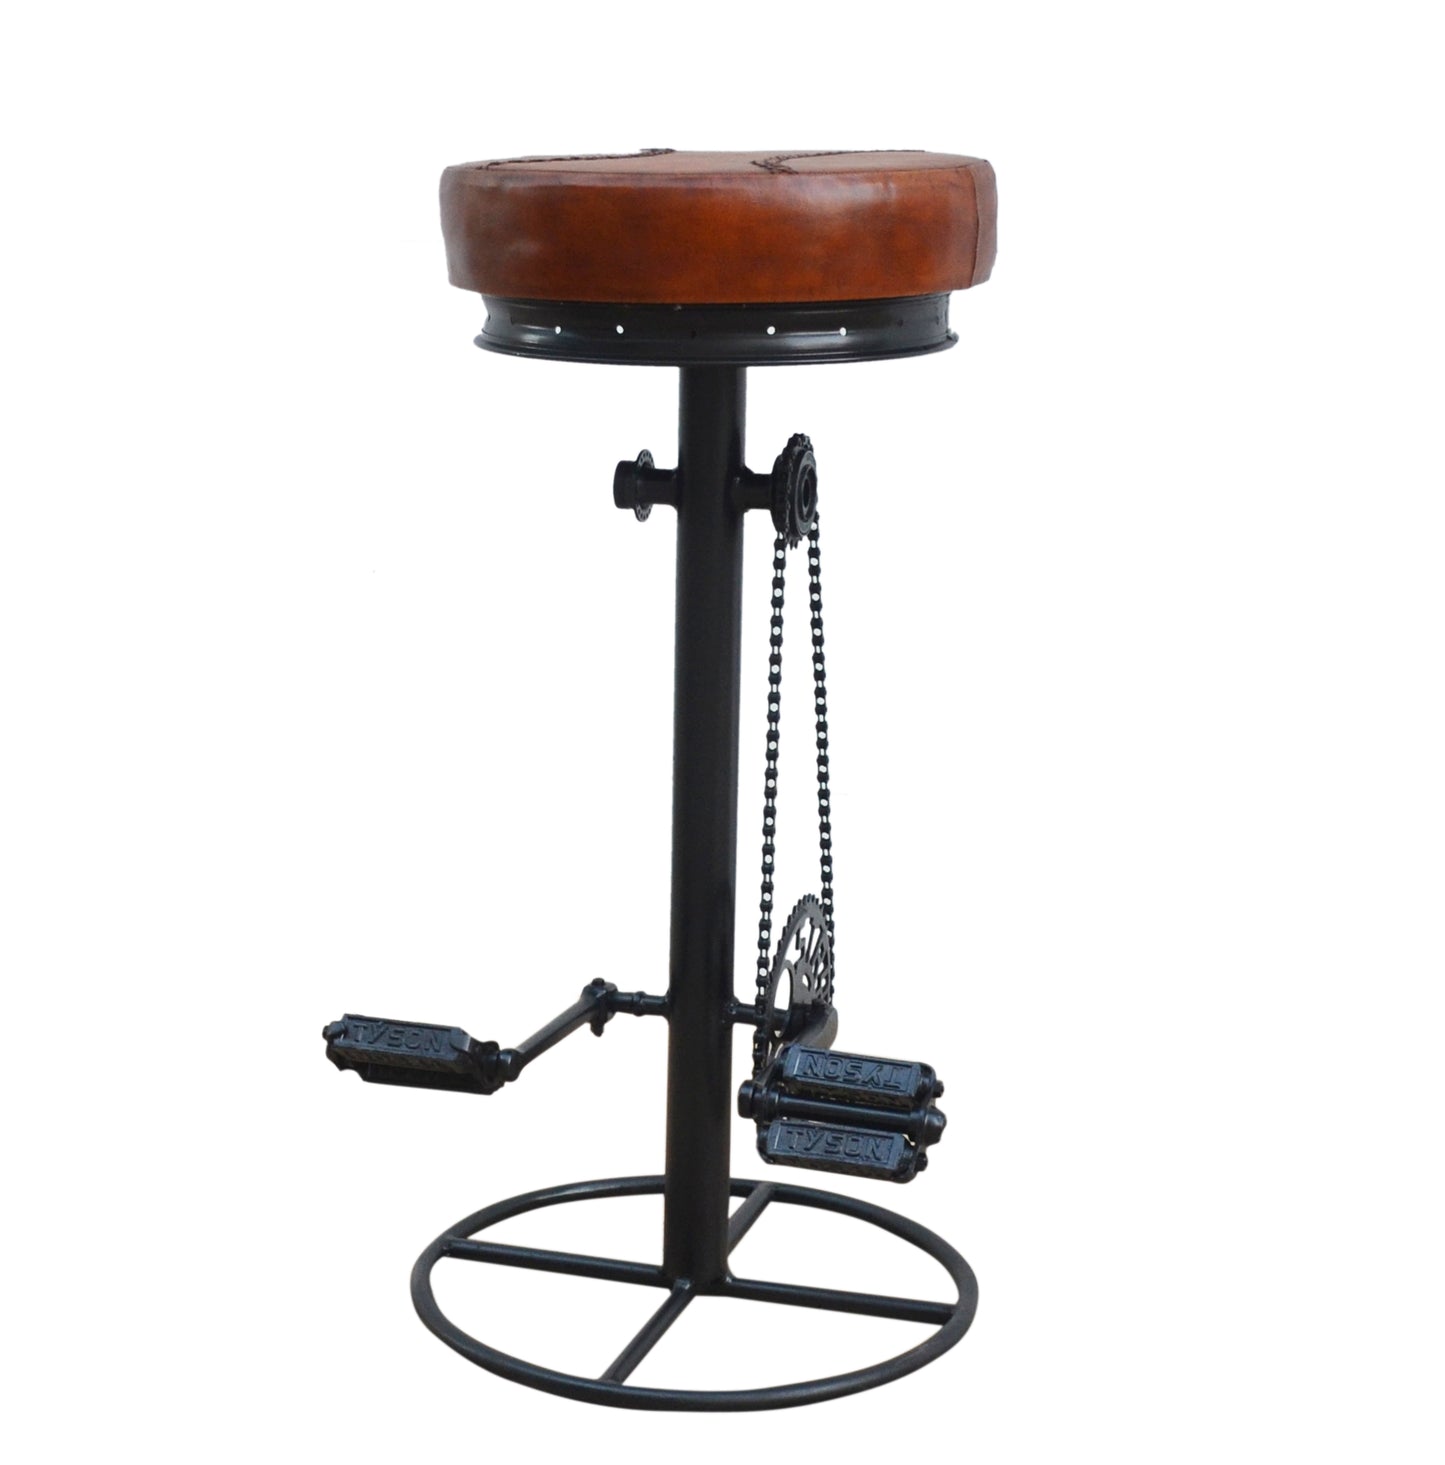 Mit And Pedal Industrial Bicycle Bar Stool - decorstore